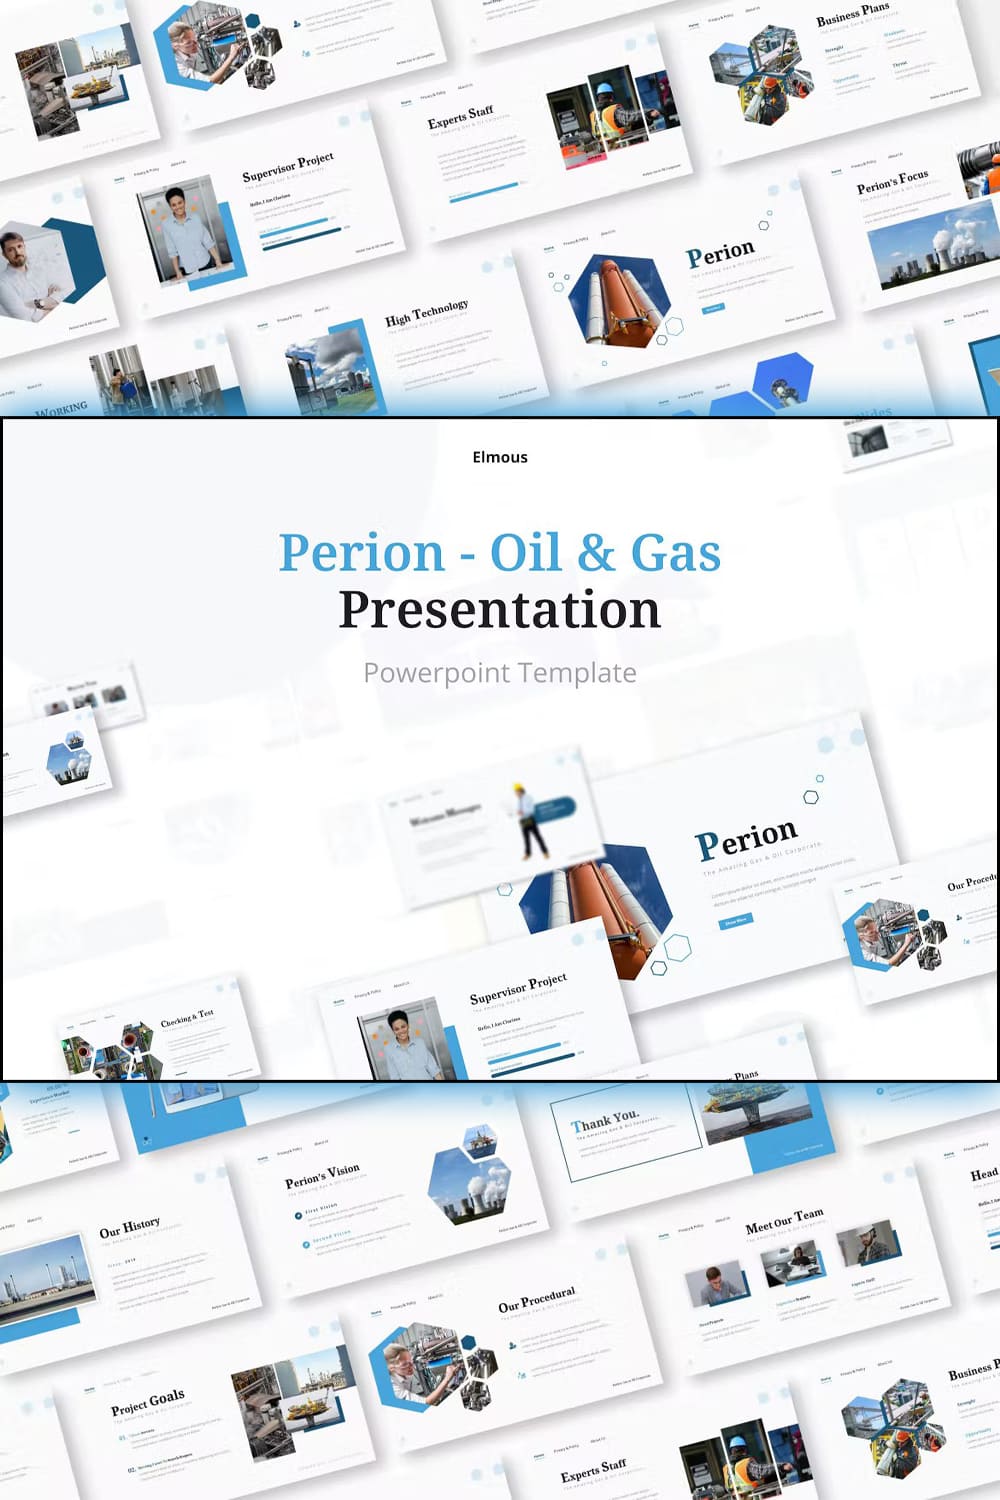 Perion gas oil powerpoint presentation template - pinterest image preview.